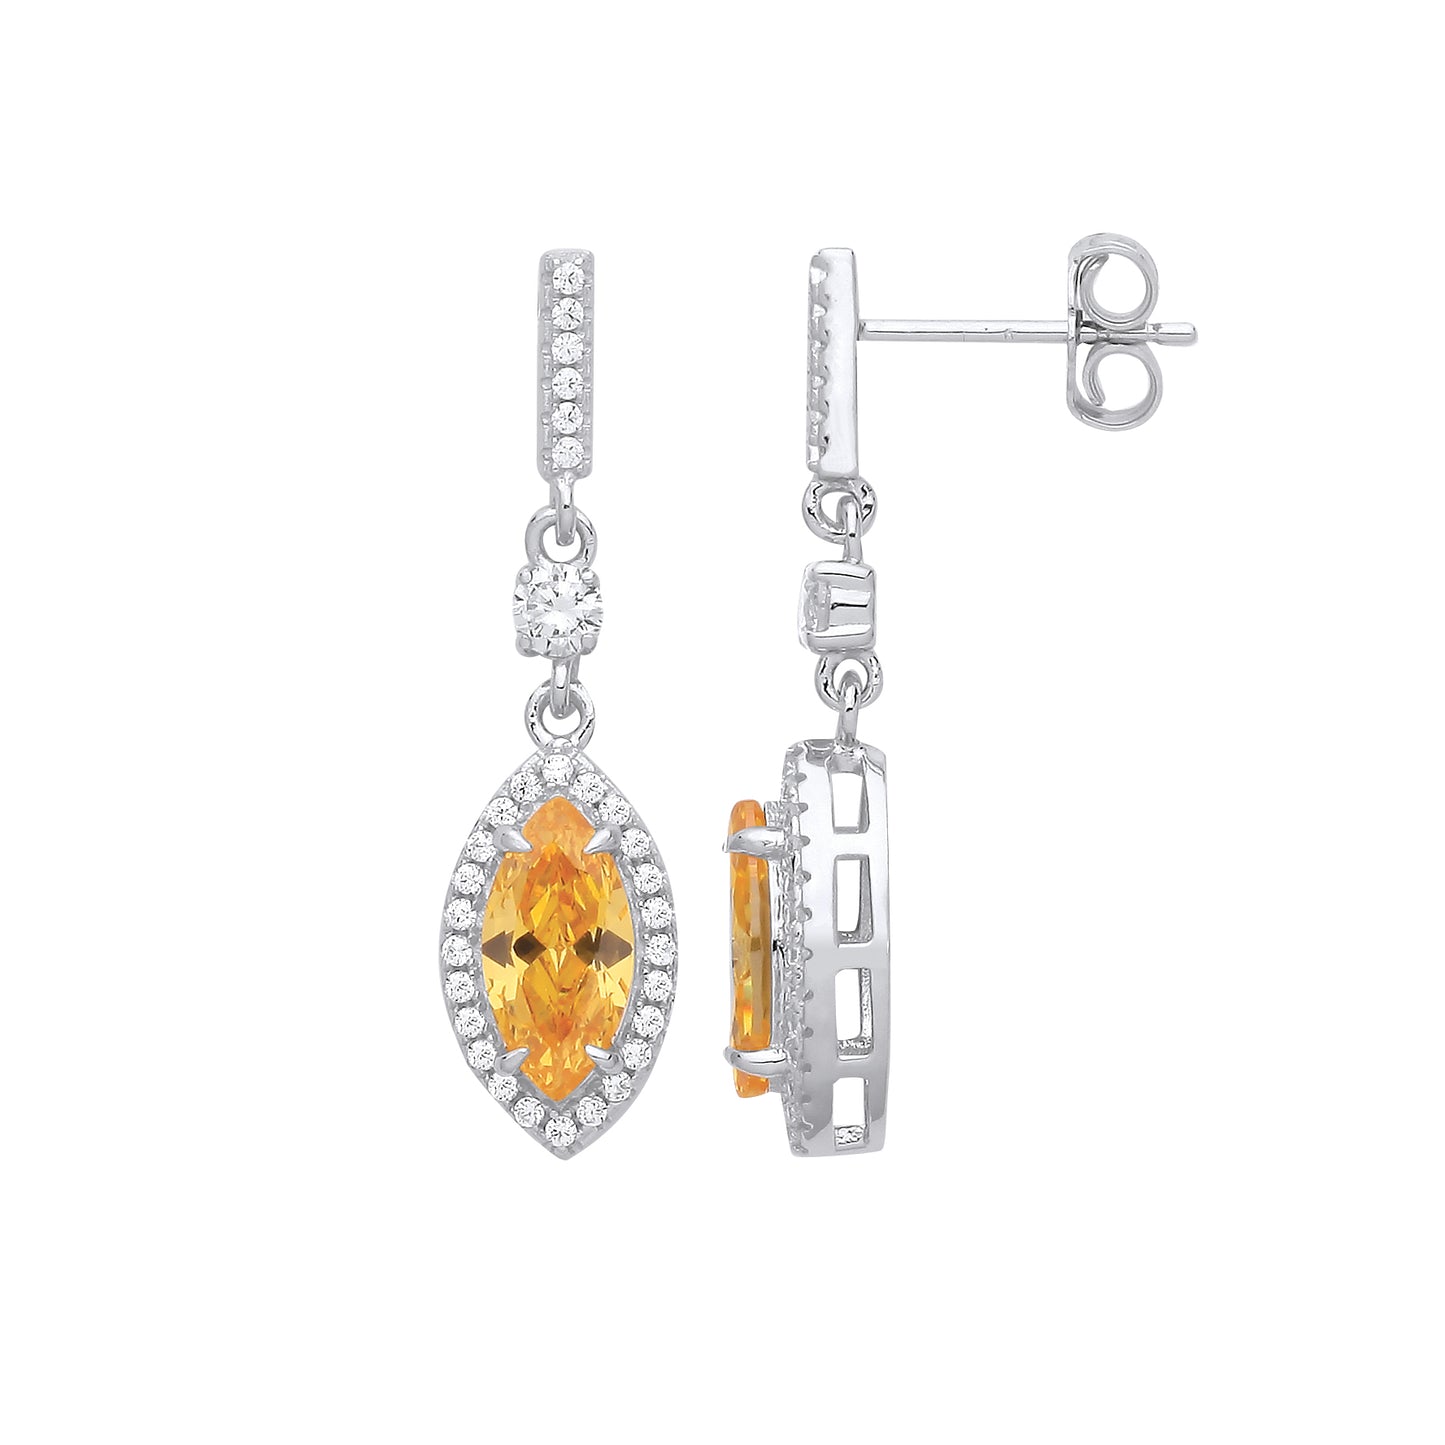 Silver  Ice and Fire Hail Drop Earrings - EAG1231